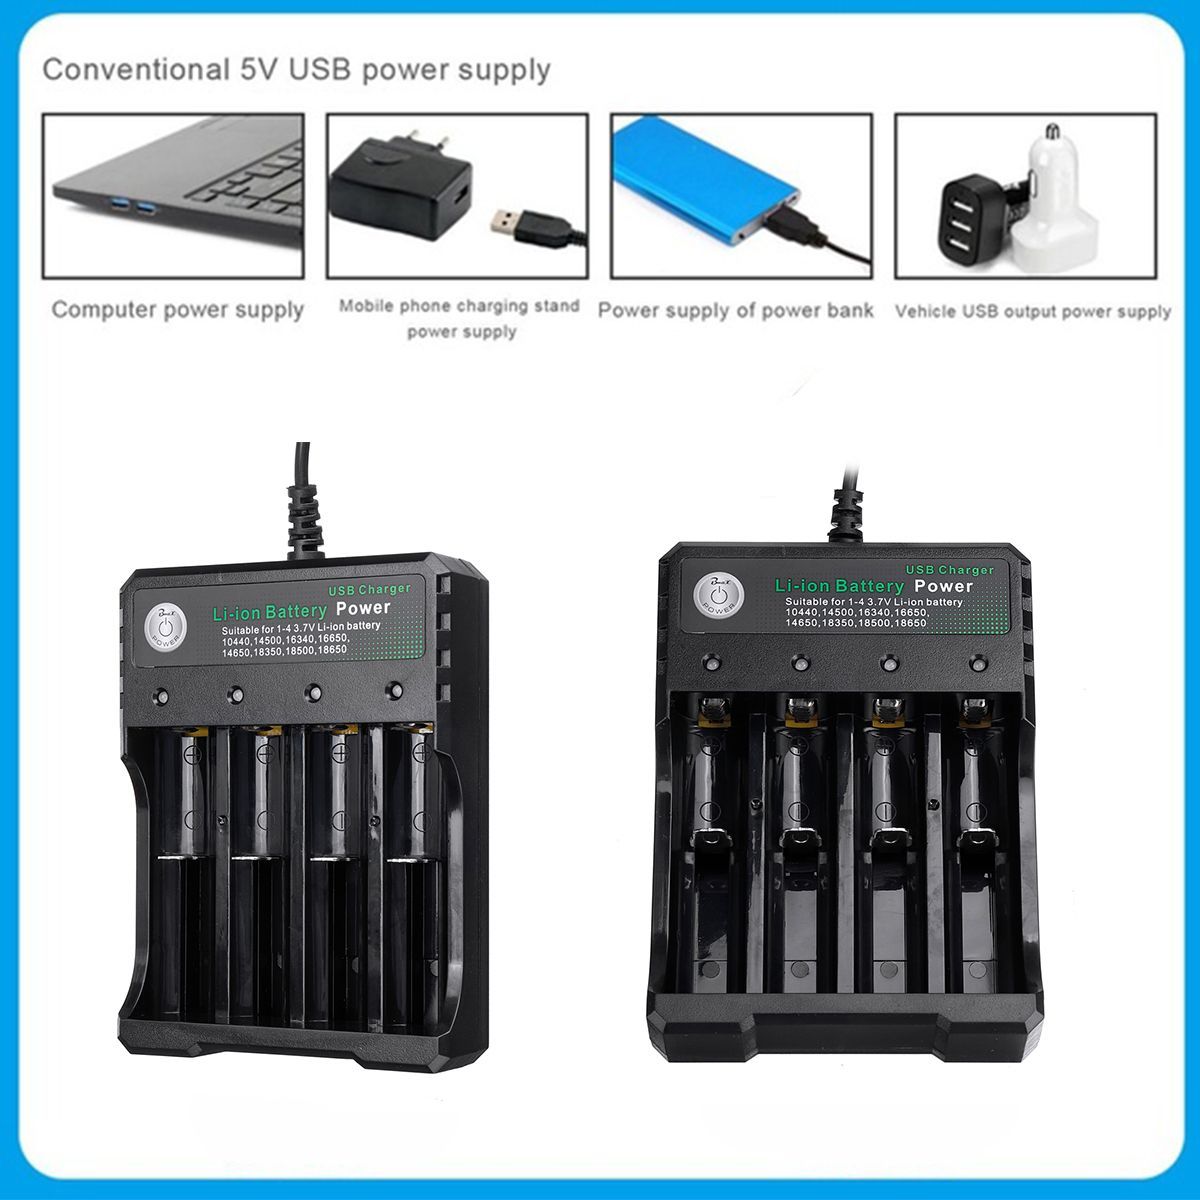 Charger-4-Slot-37v-Battery-Charger-Multifunction-Charge-Universal-1618230